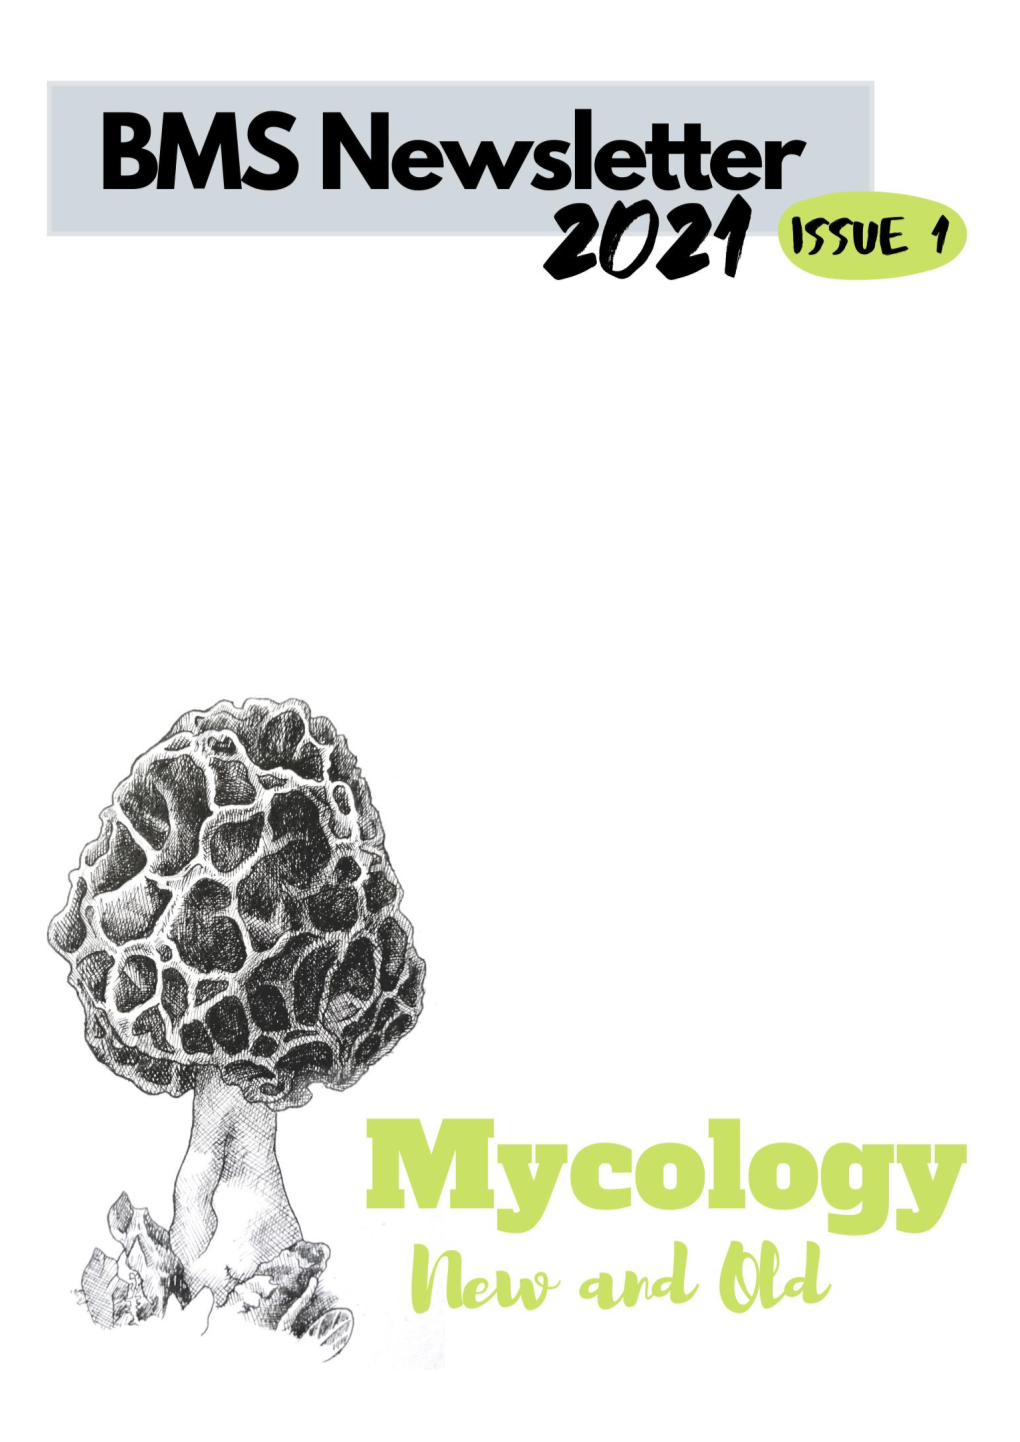 BMS Newsletter, We Celebrate the New Year, and the 125Th Anniversary of the Society, Though Looking at Mycology Both New and Old